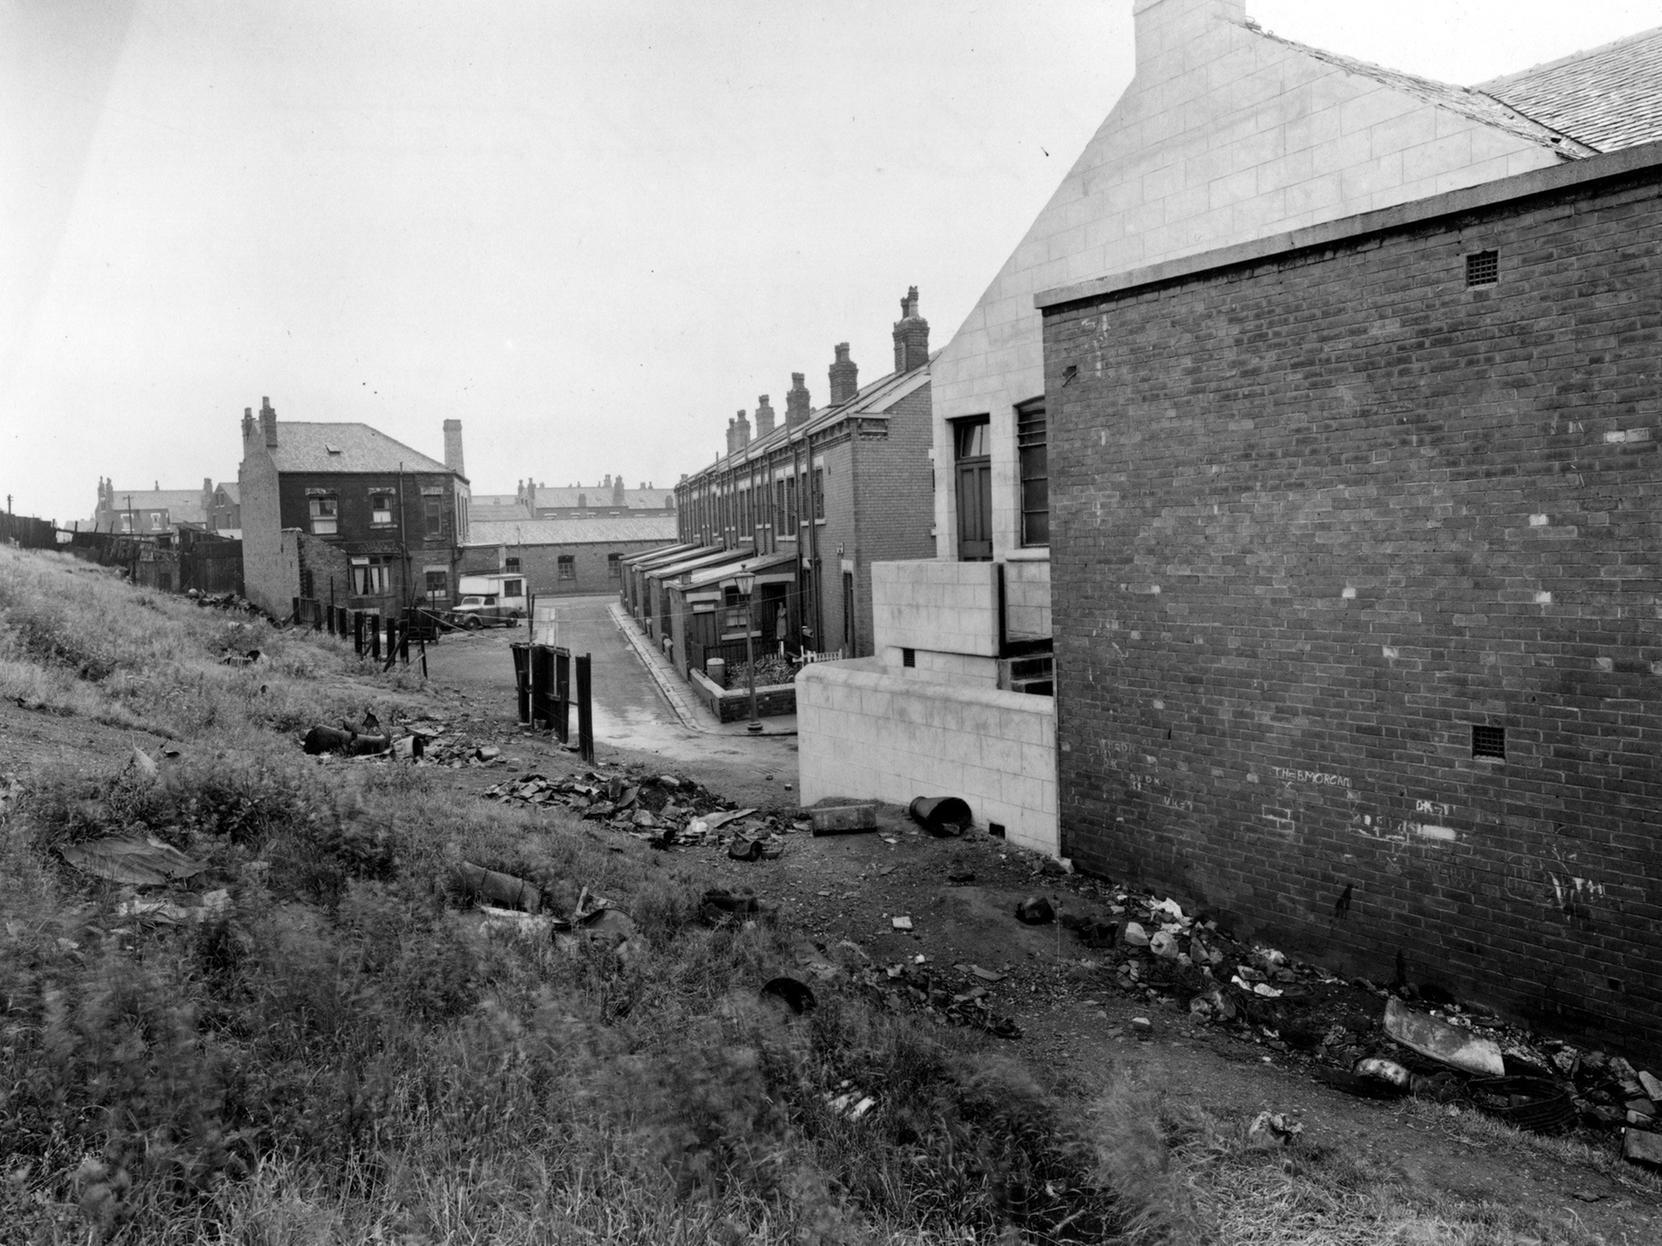 Cross Green's Back Easy Road, seen in centre, taken from an area known locally as 'the quarry'. This locality housed an assortment of piggeries, henruns and stables. The white building is the rear of East Leeds Working Men's Club.